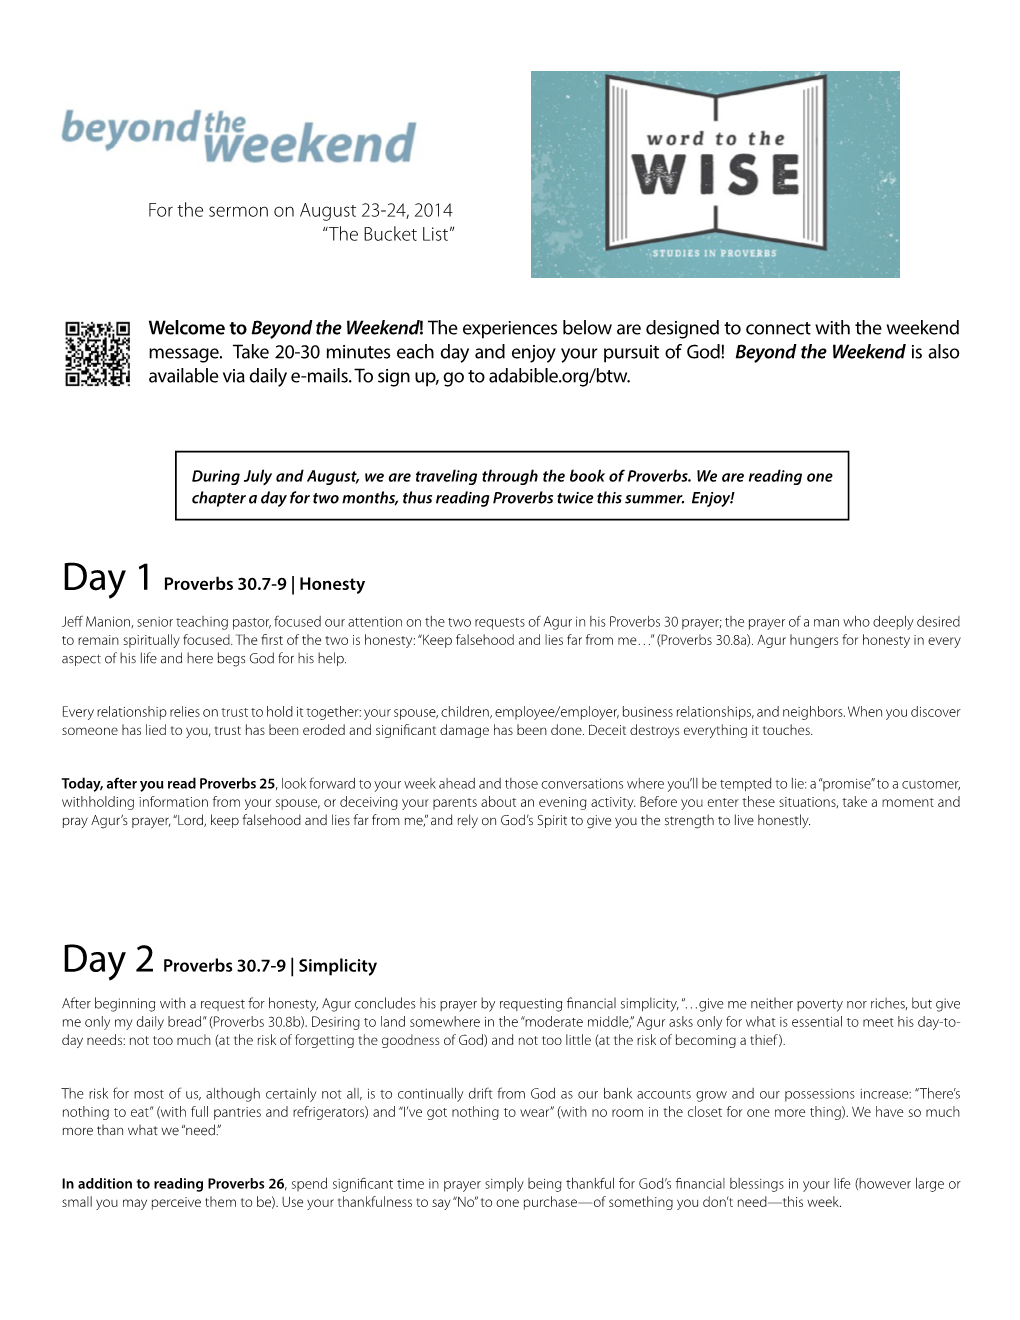 Beyond the Weekend! the Experiences Below Are Designed to Connect with the Weekend Message